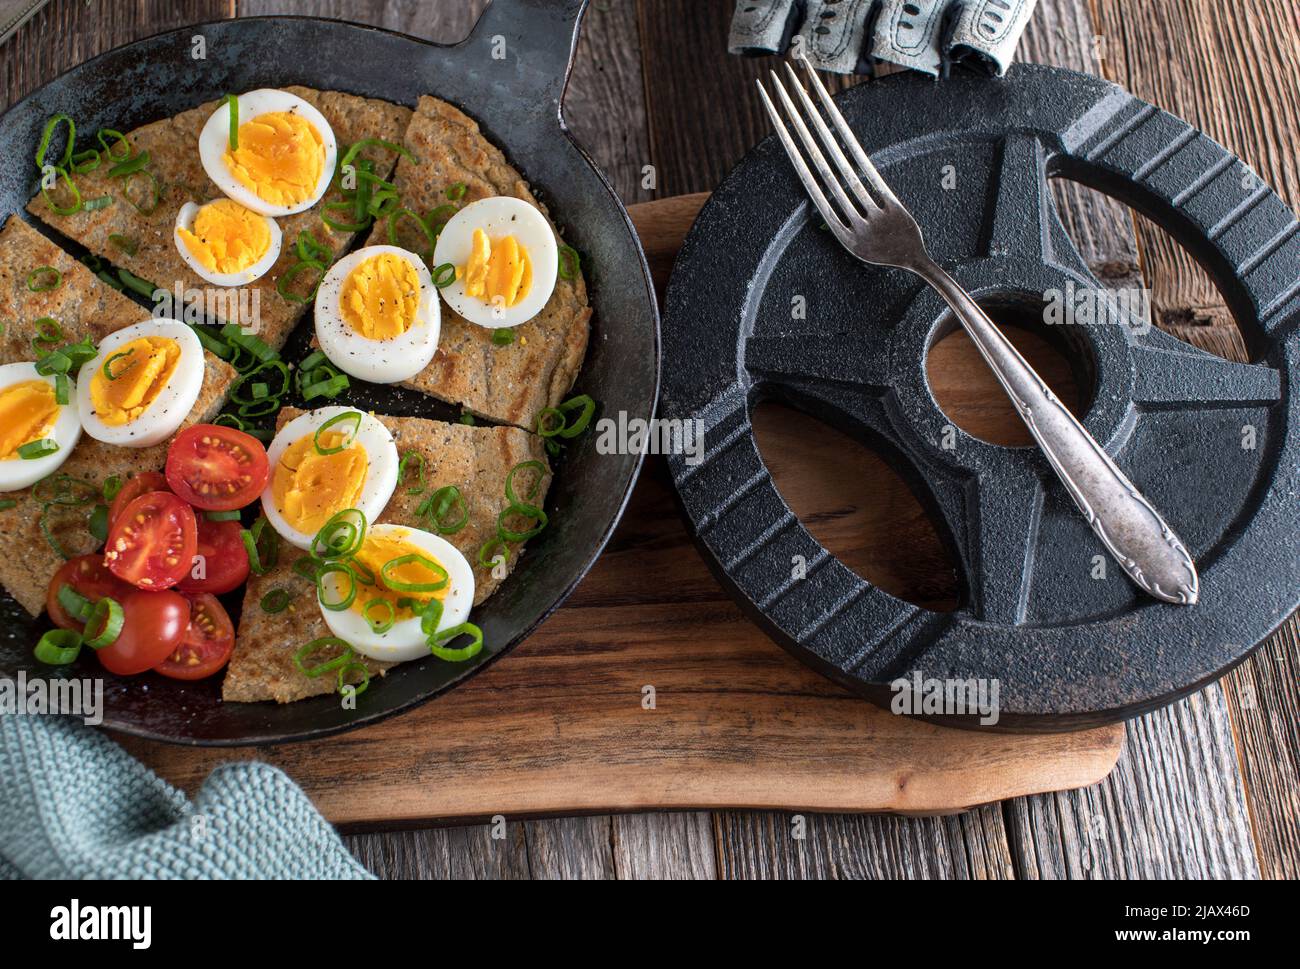 Fitness breakfast with homemade oatmeal pancake, boiled eggs, scallions and tomatoes. Stock Photo